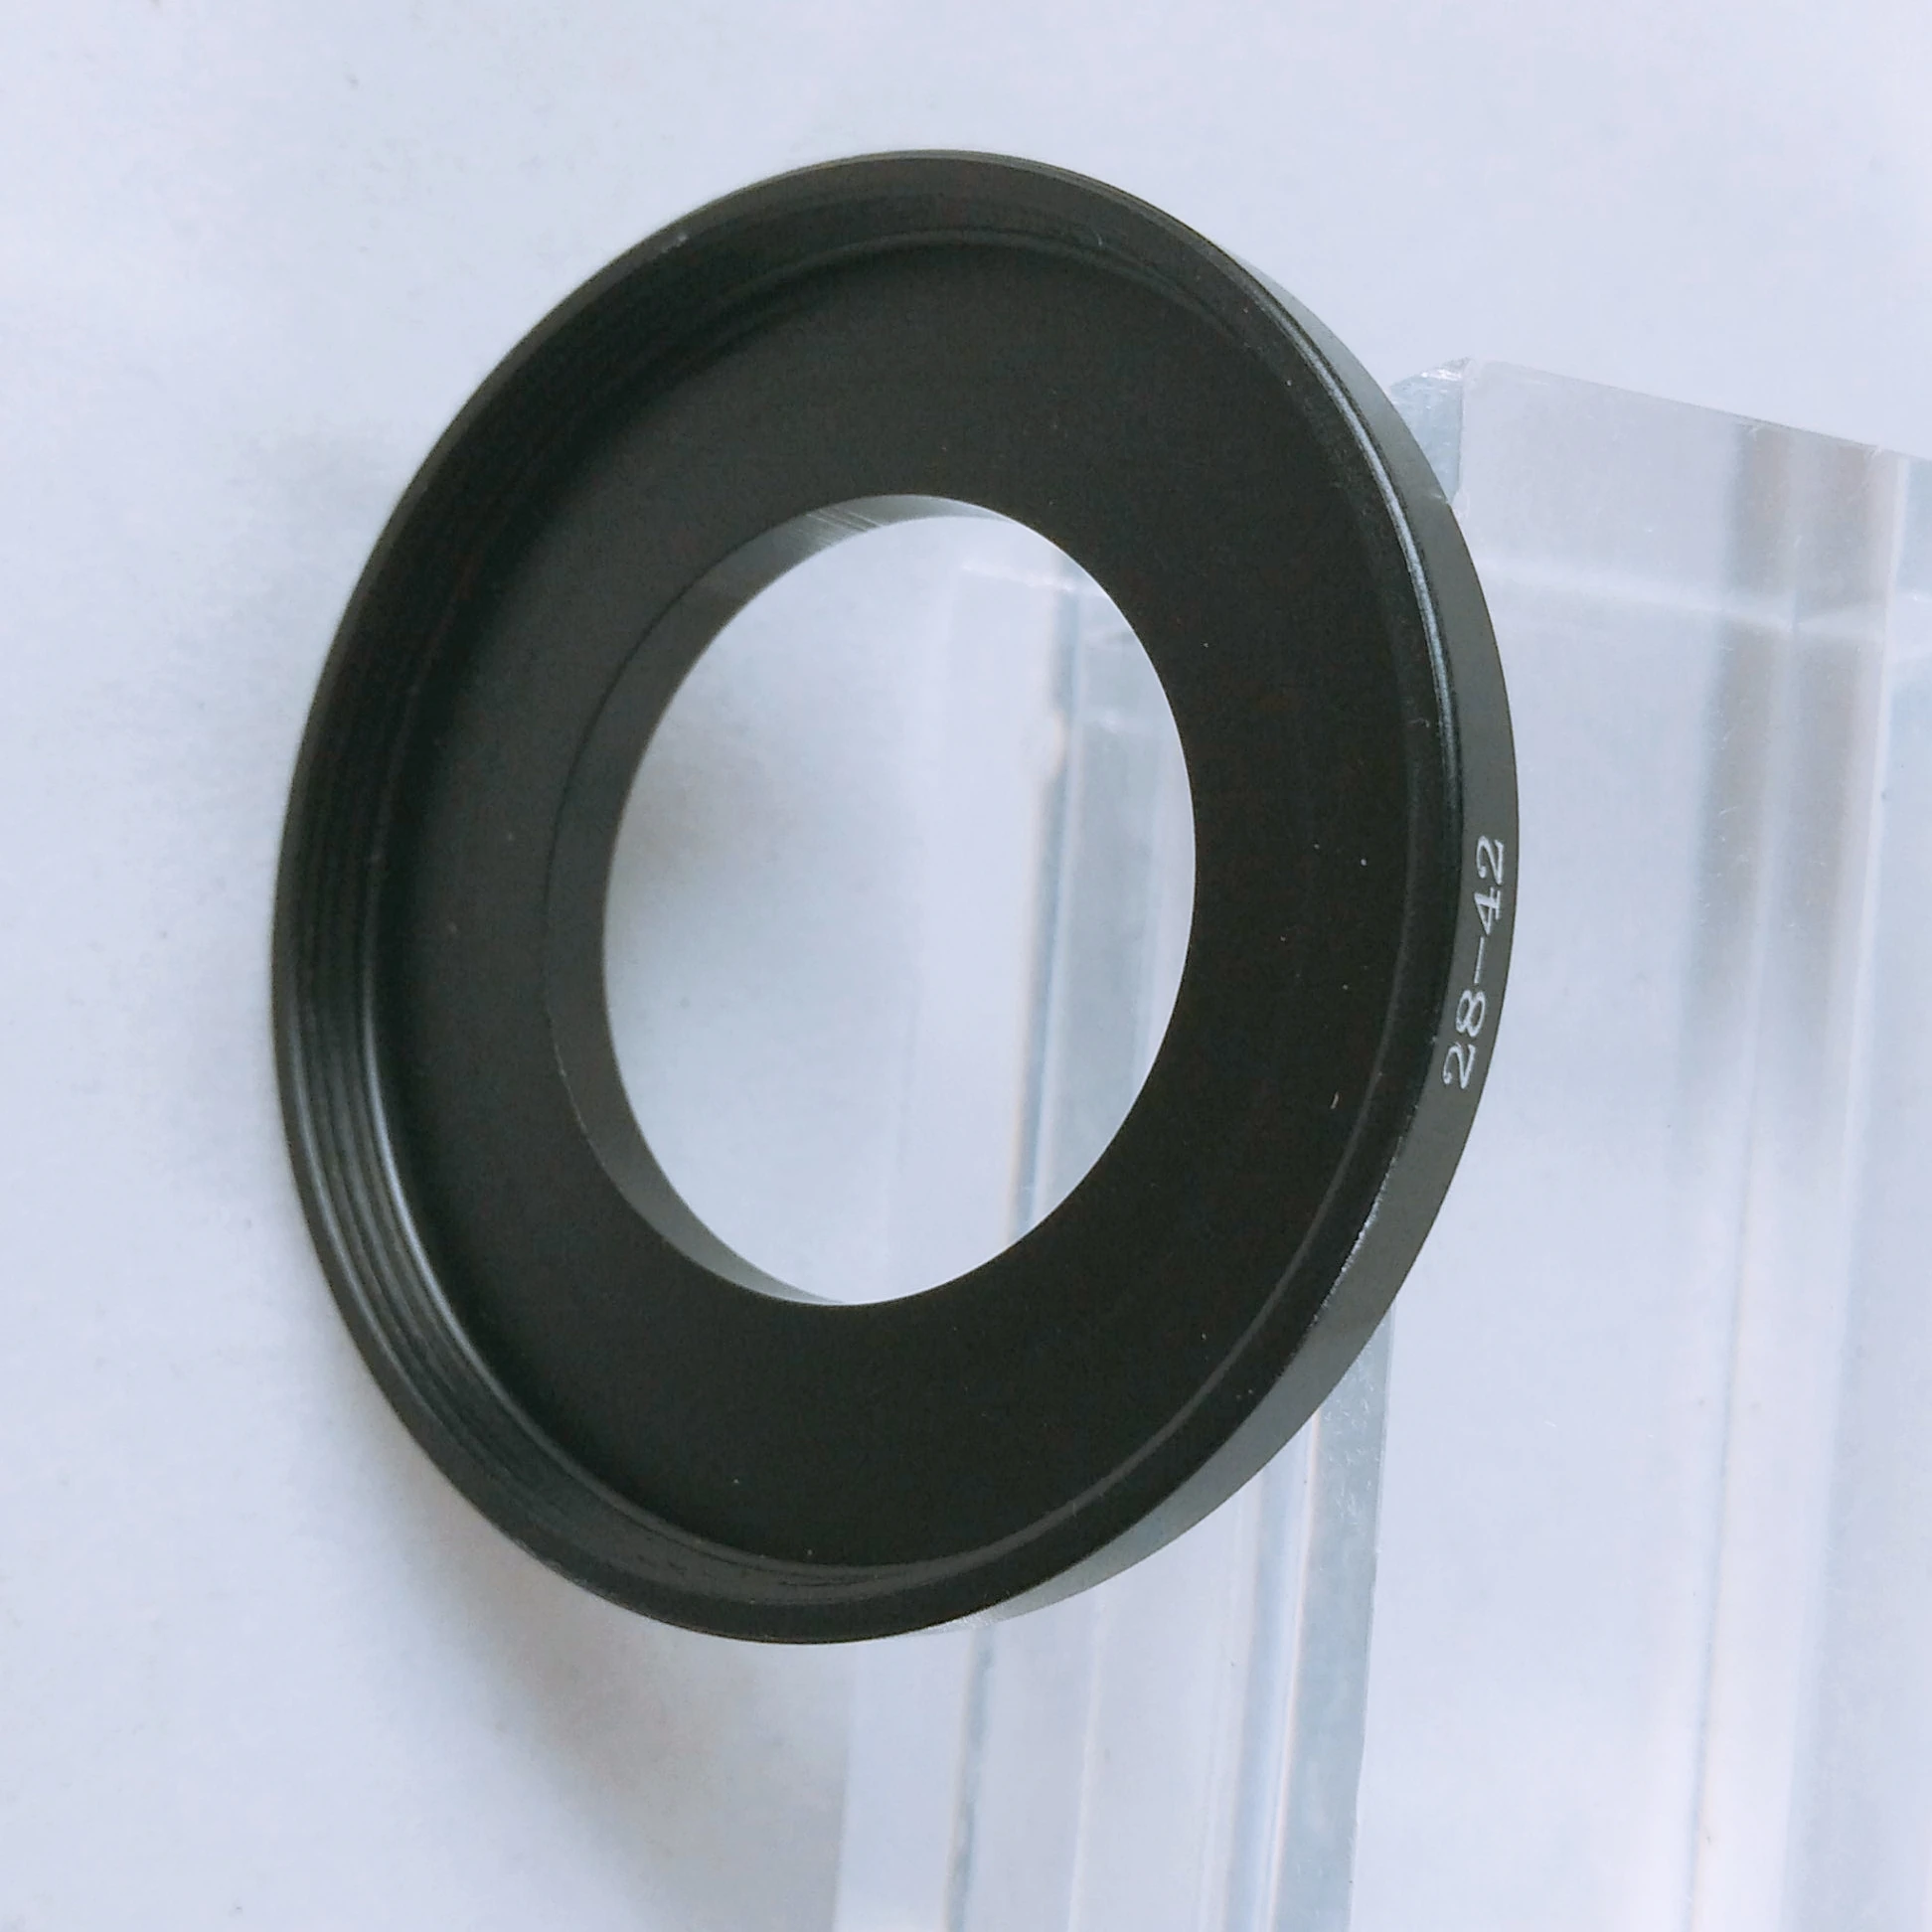 Gadget Place 43mm to 28mm Adapter Ring